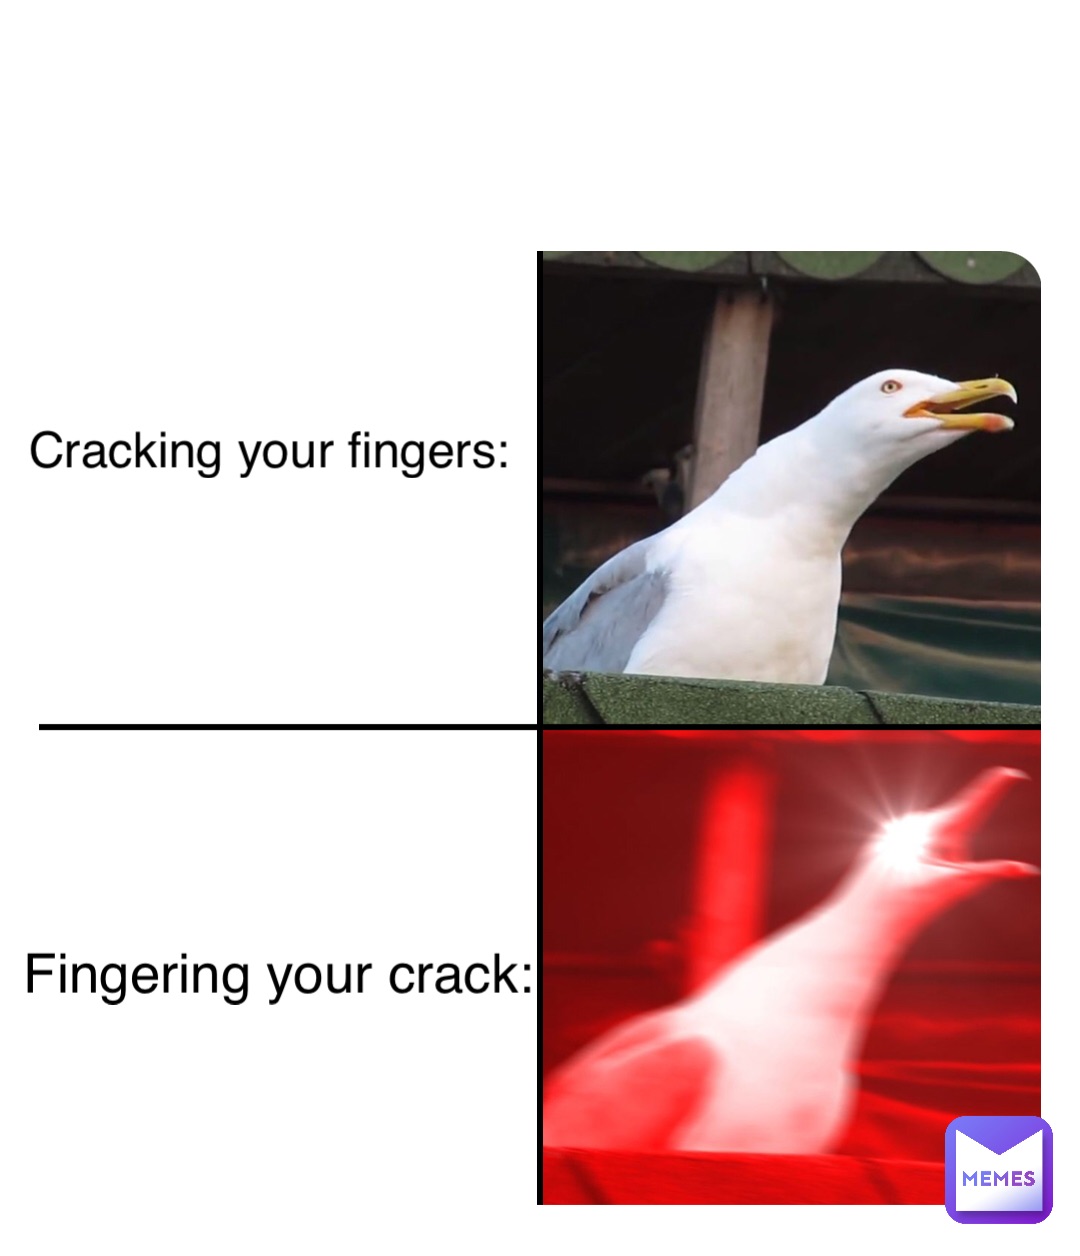 Double tap to edit Cracking your fingers: Fingering your crack: